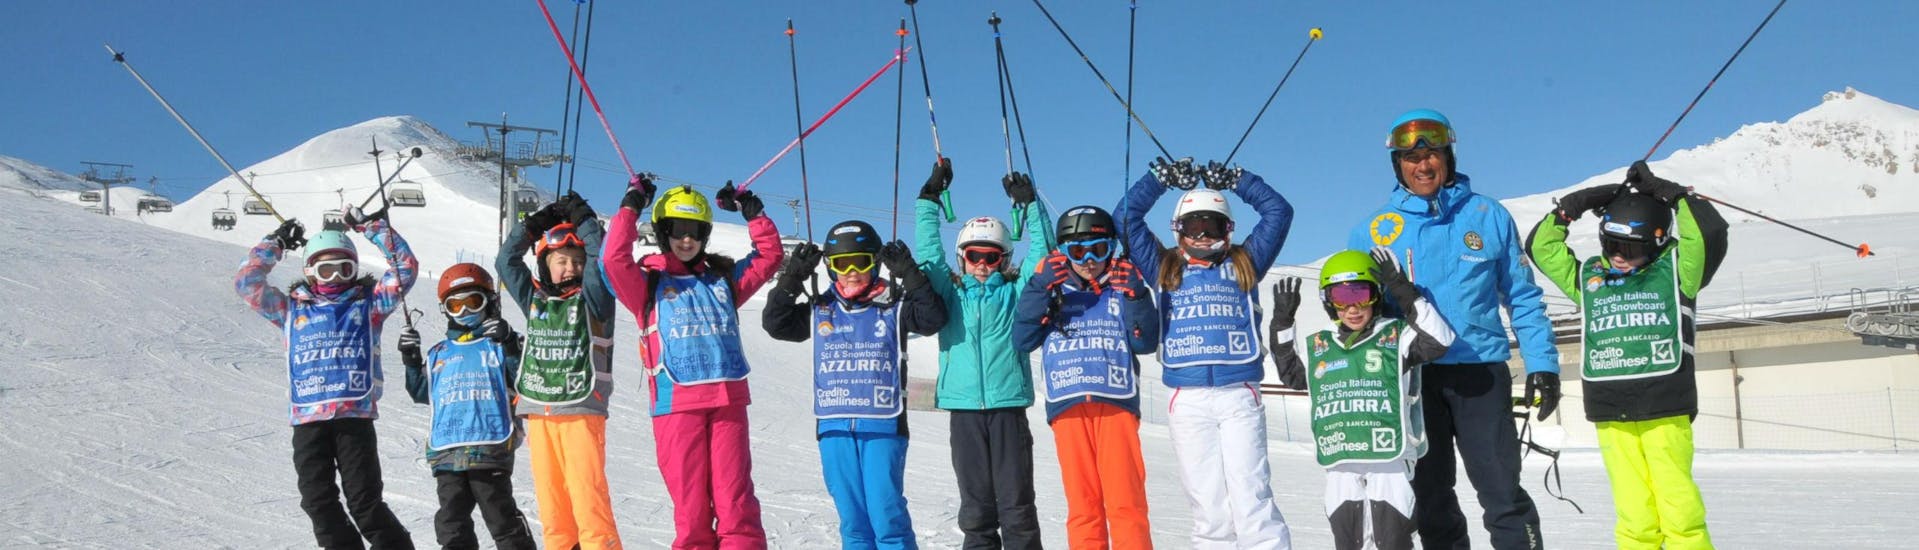 A group of children is enjoying their Kids Ski Lessons (4-14 y.) - Half Day - First Timer with the ski school Scuola di Sci Azzurra Livigno on the ski slopes of Livigno.